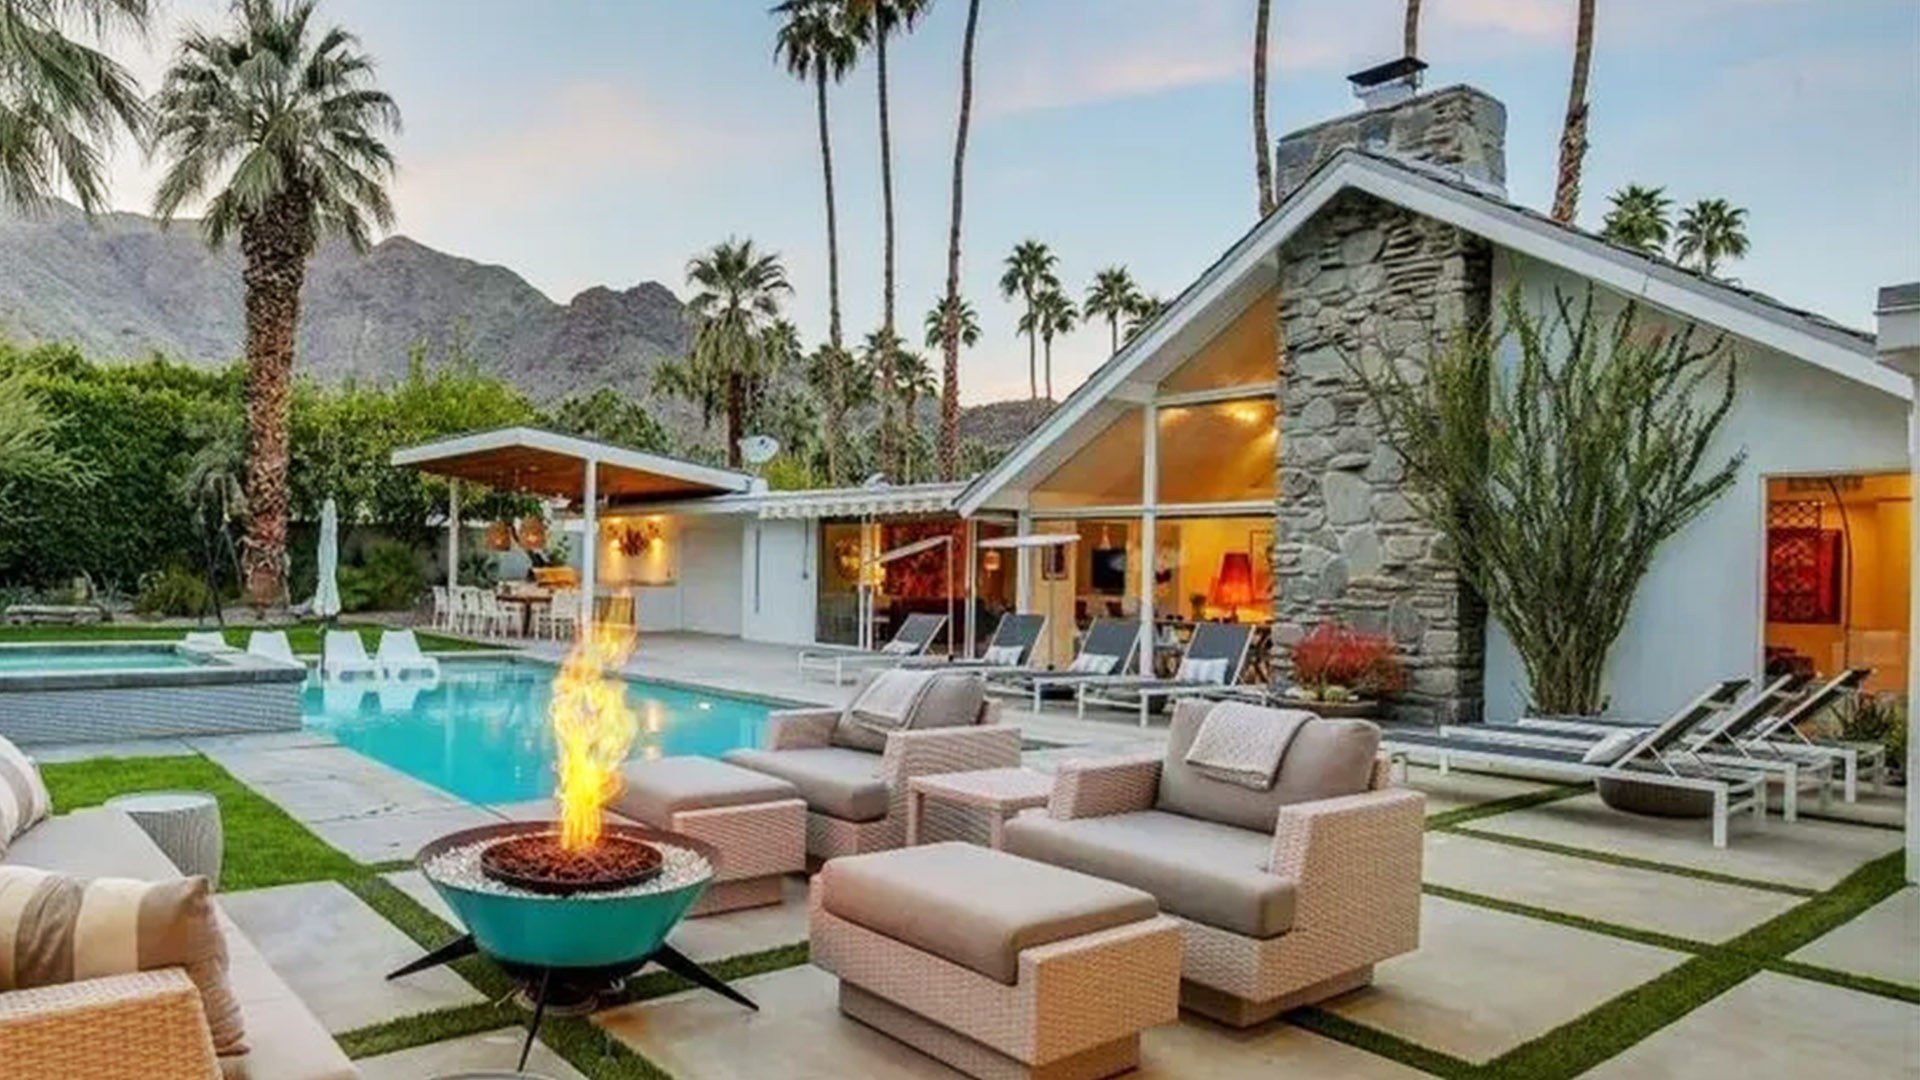 Polynesia in Palm Springs: Midcentury In model A-Frame Listed for $3.7M